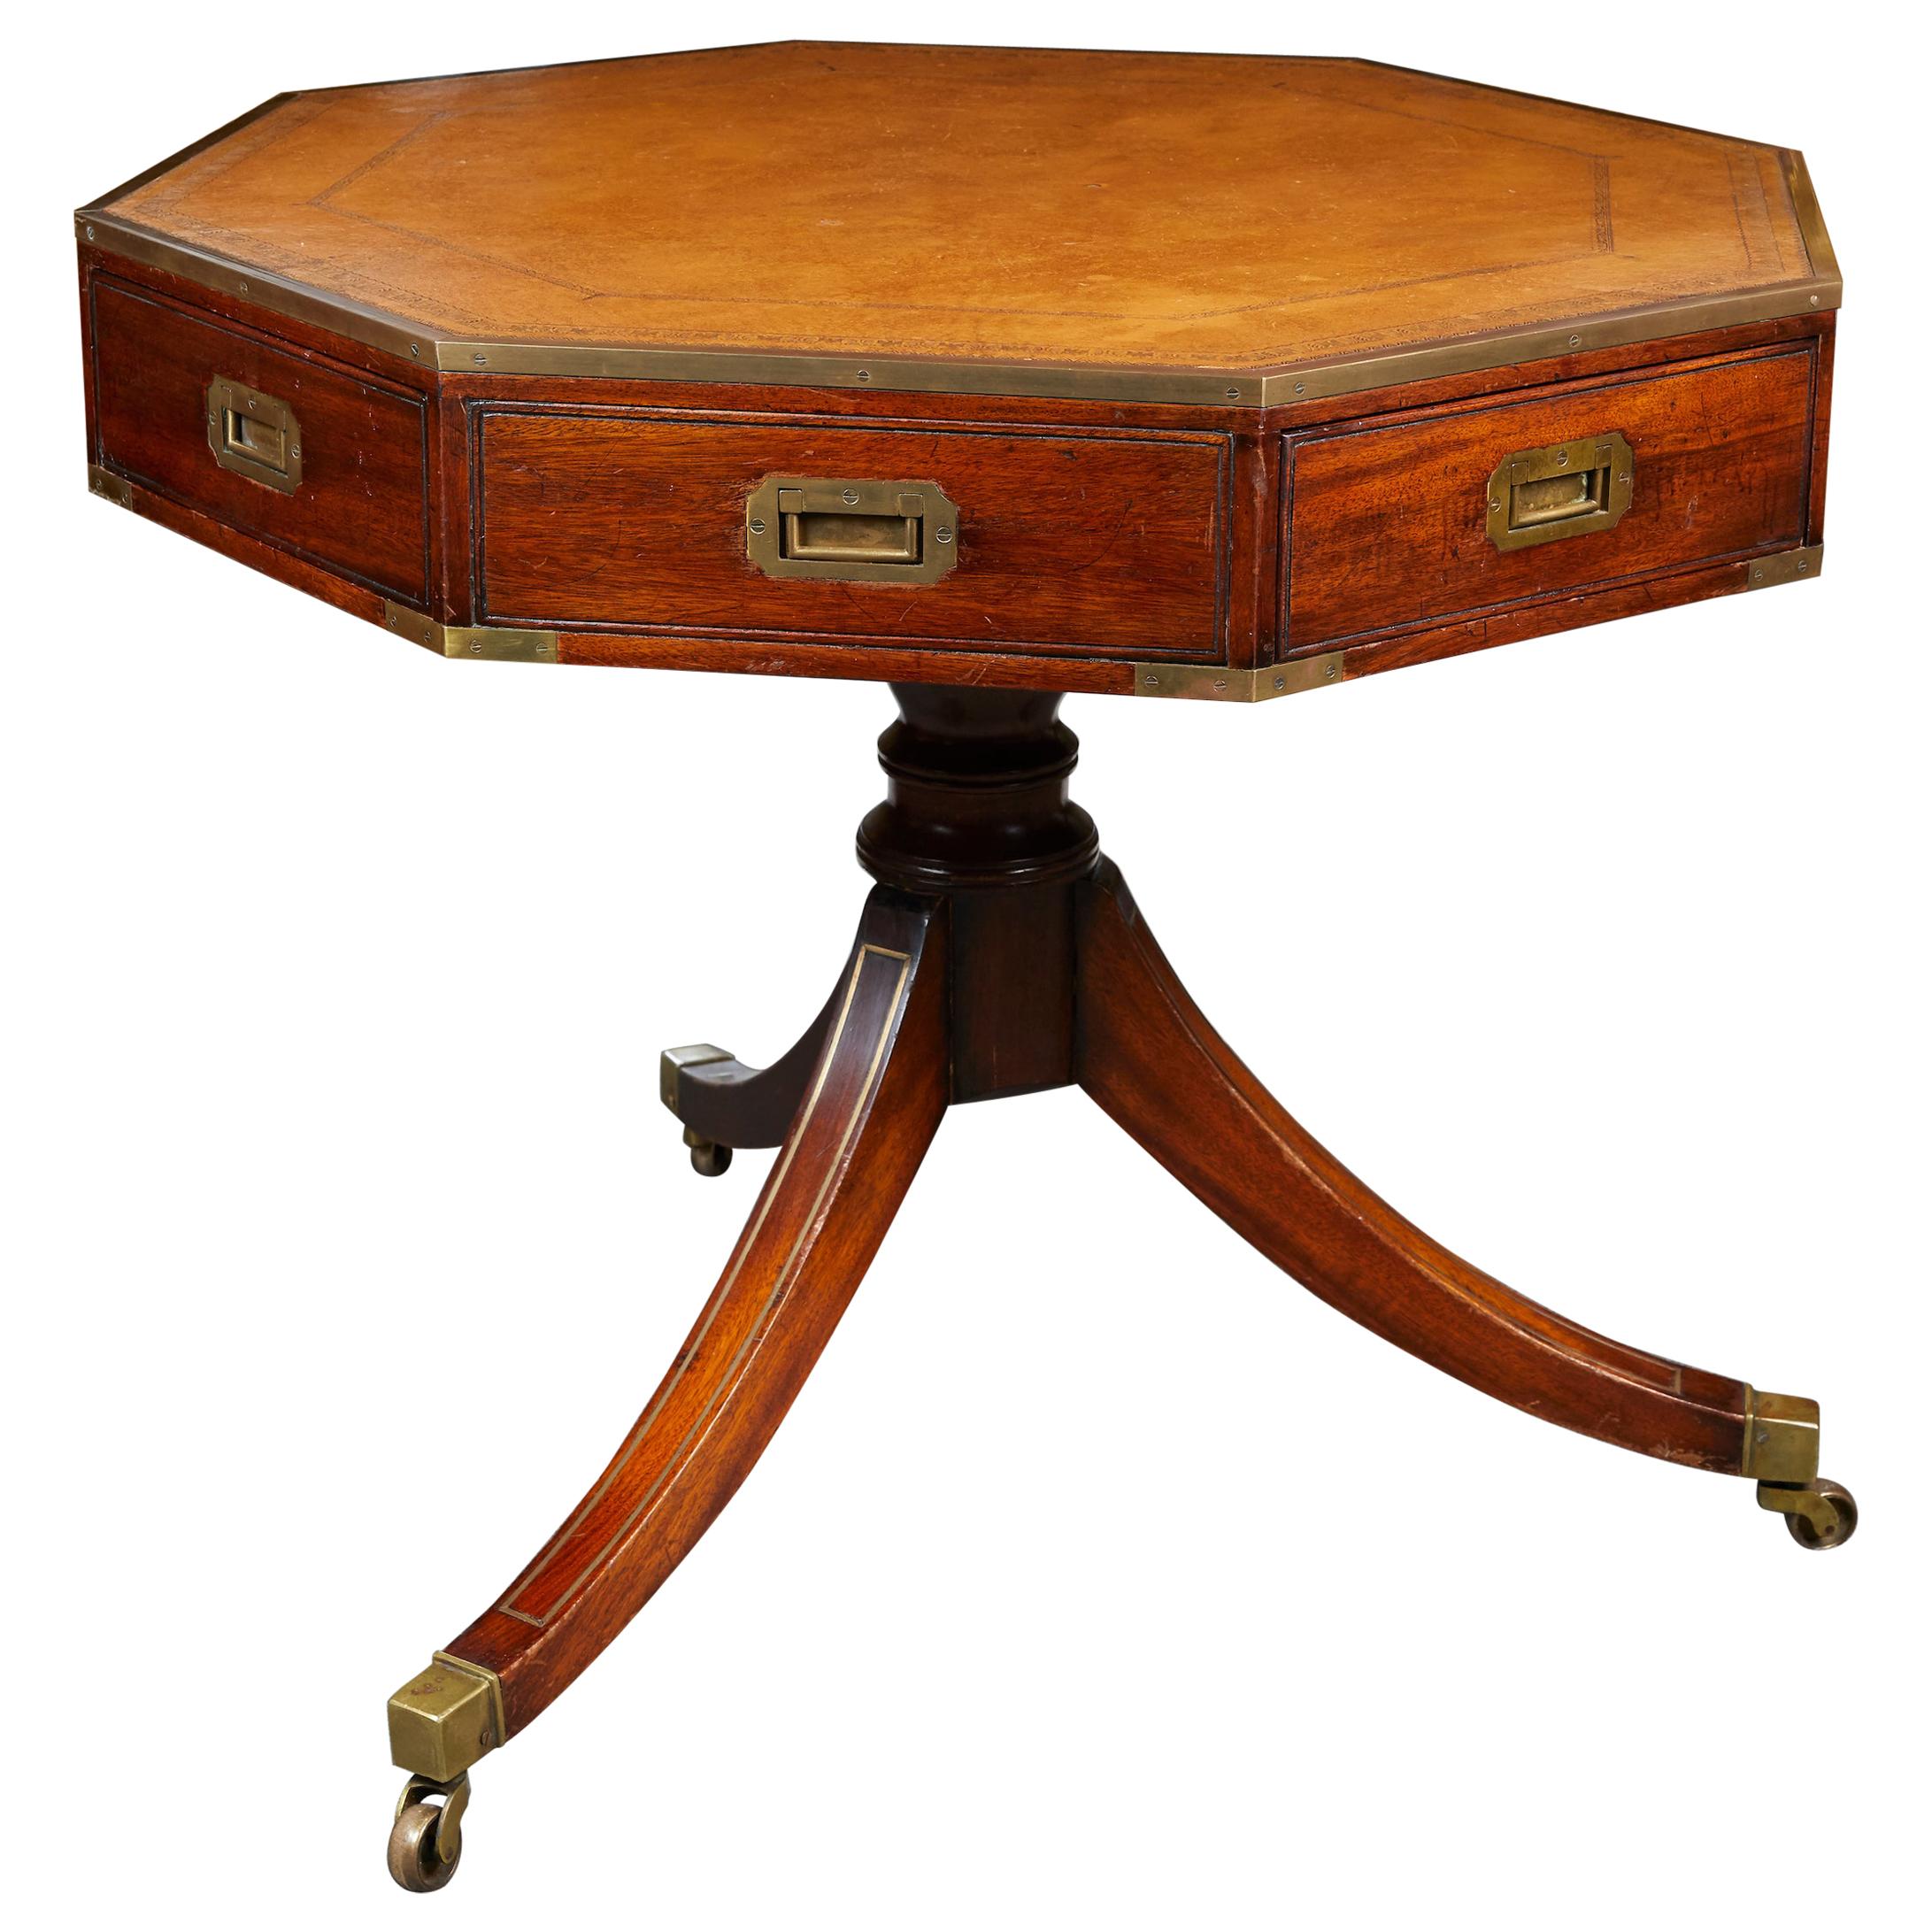 Elegant English Campaign Style Drum Table